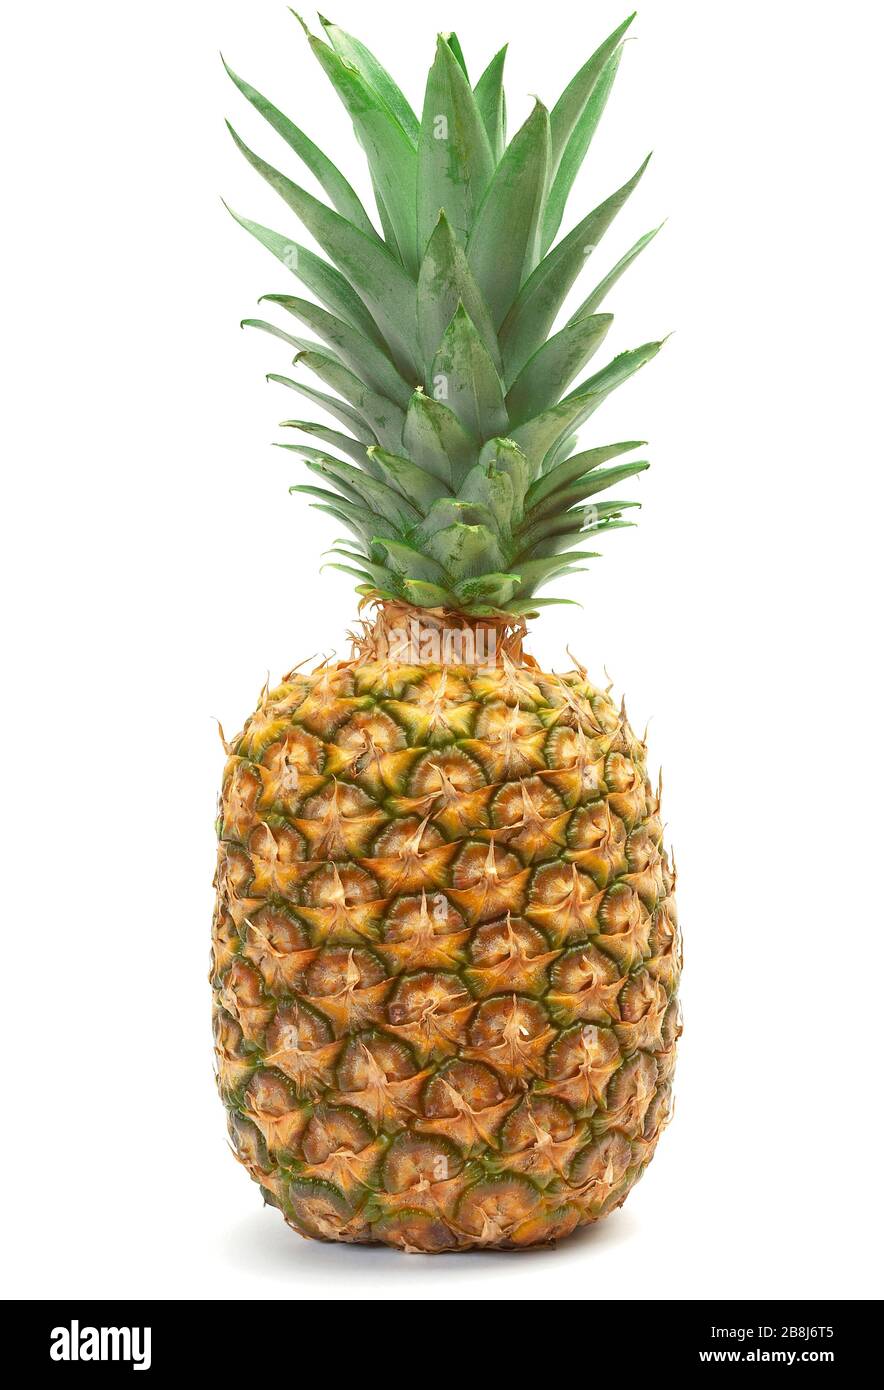 Pineapple isolated on the white background. Stock Photo